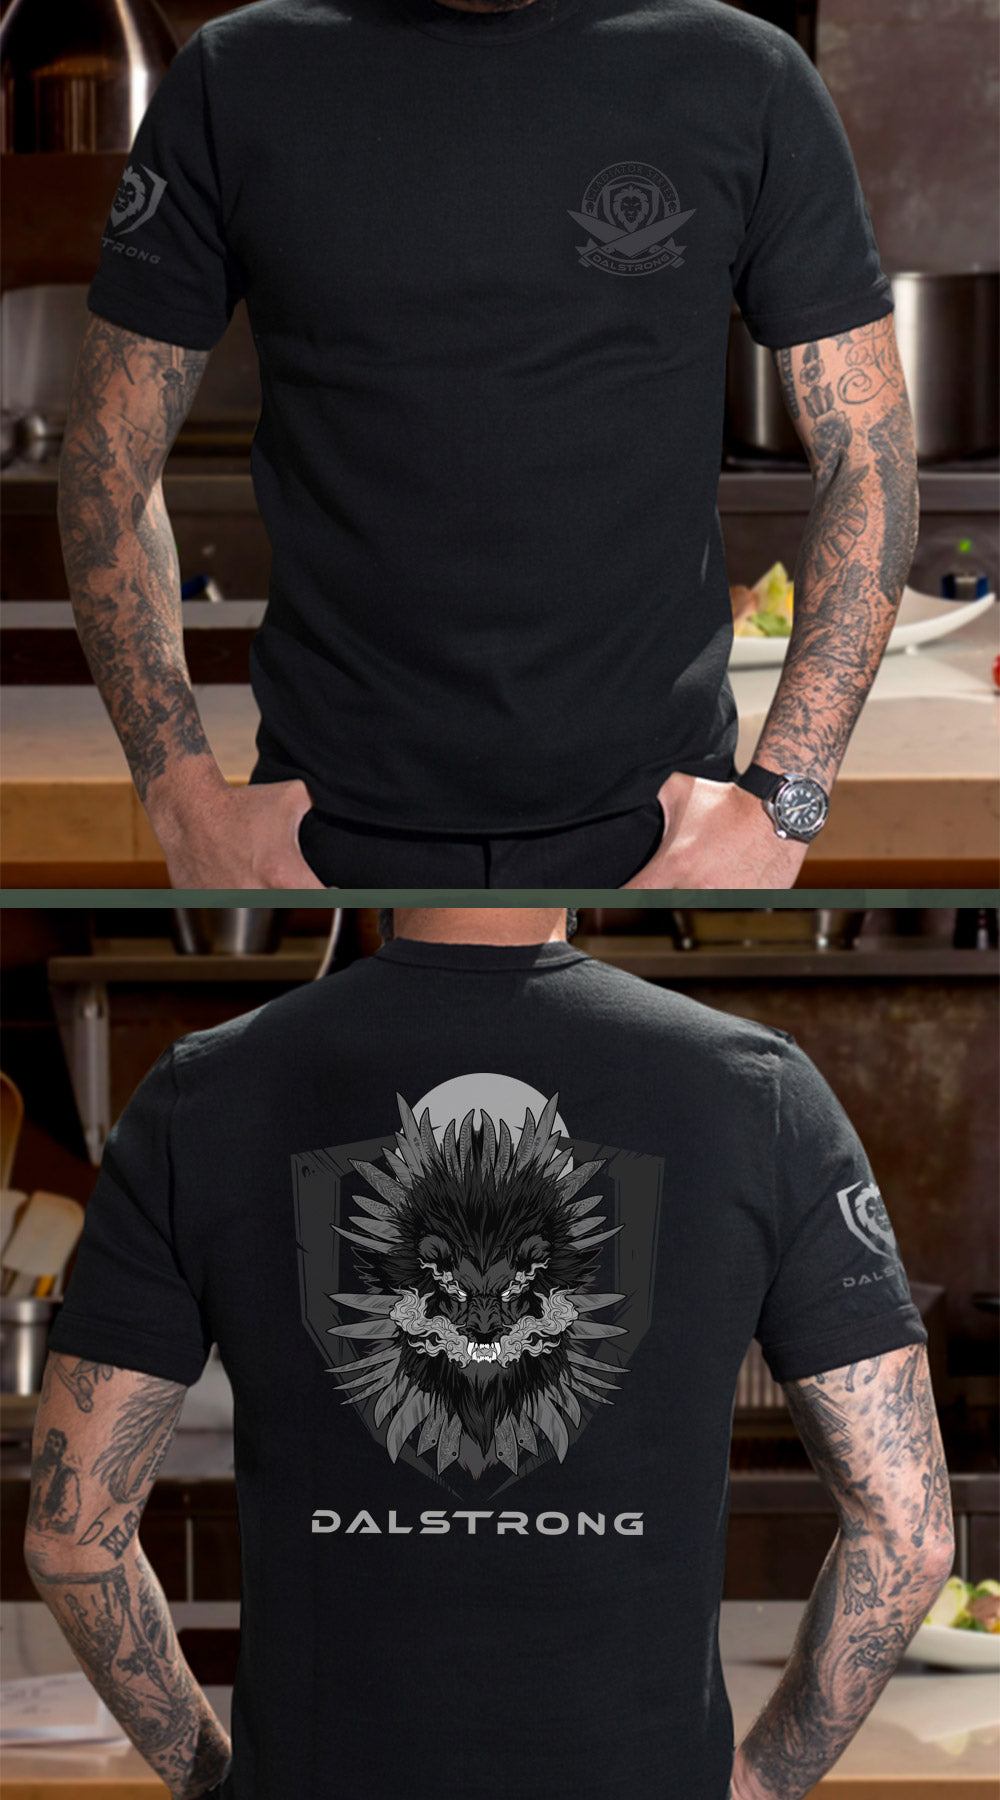 Armed To The Teeth Tee black front and back preview.